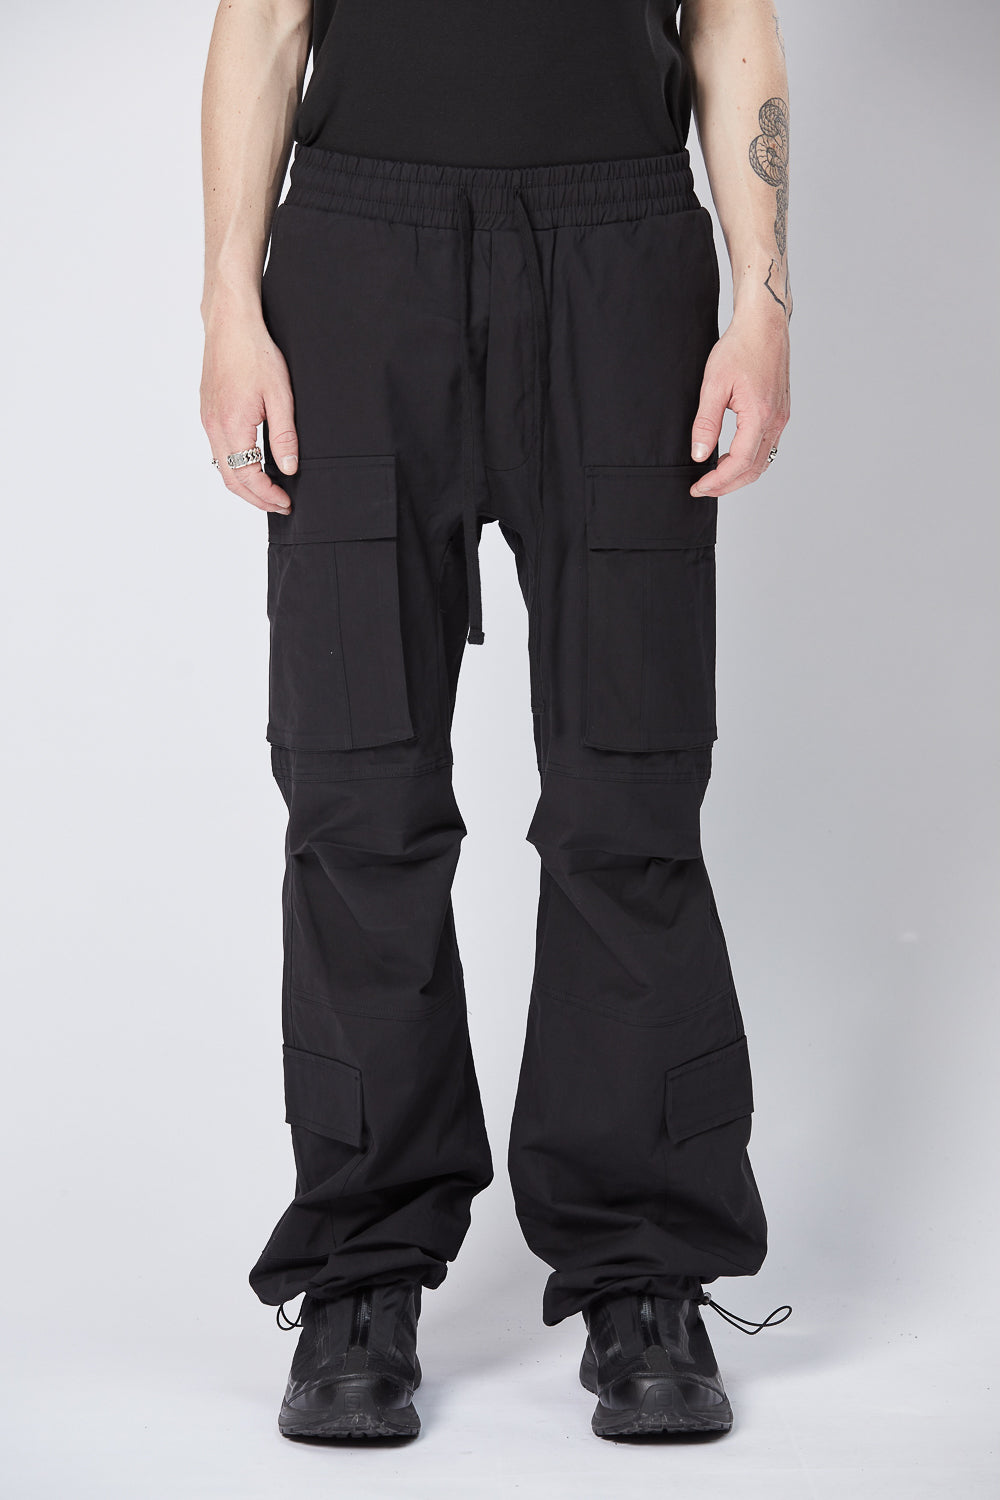 Buy the Thom Krom M ST 441 Sweatpants Black at Intro. Spend £50 for free UK delivery. Official stockists. We ship worldwide.